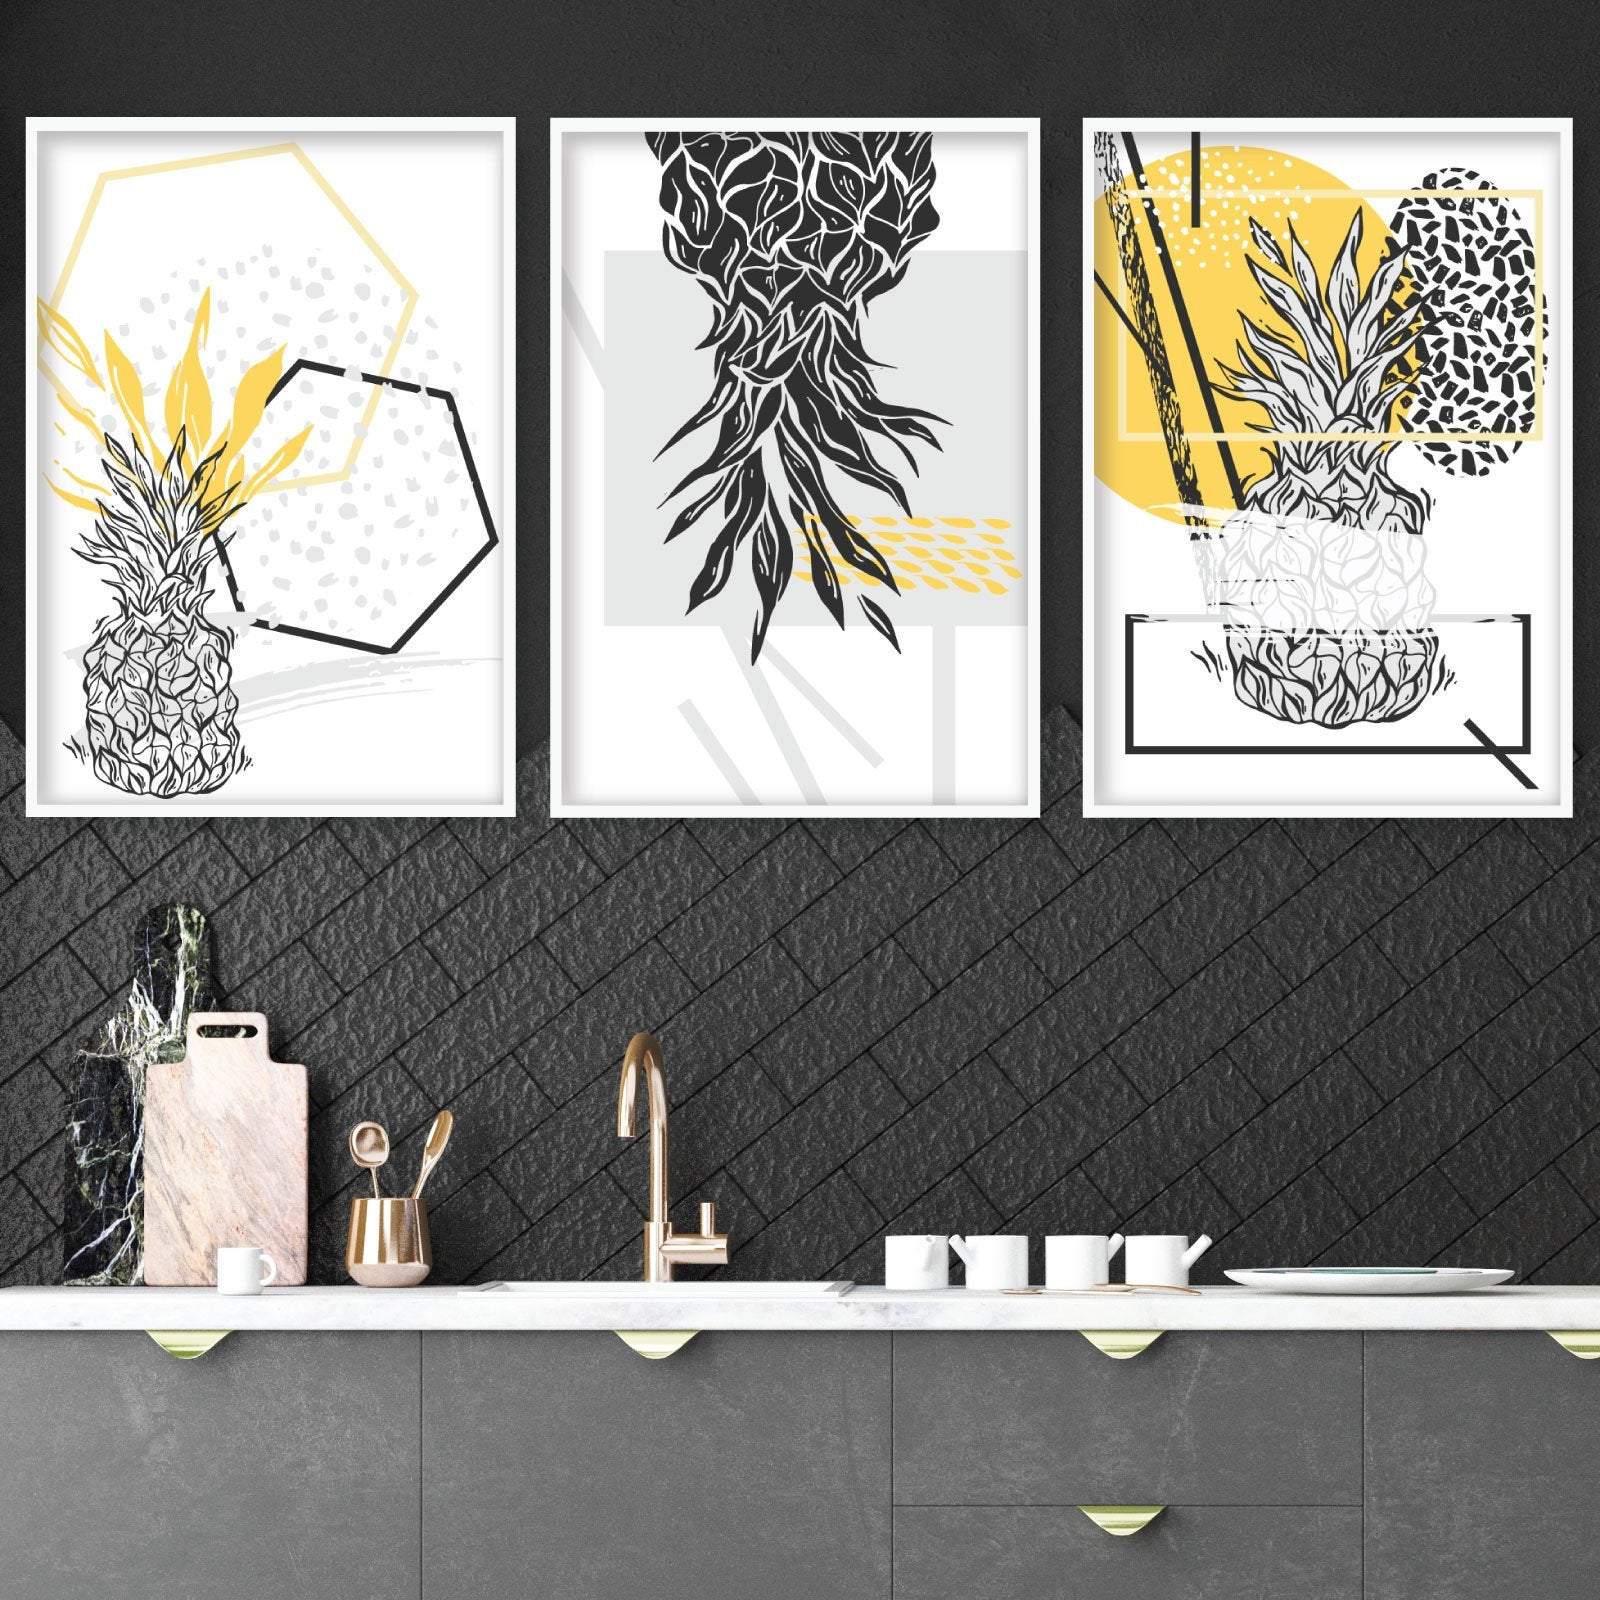 GEOMETRIC Abstract set of 3 Yellow & Black Line Art Prints PINEAPPLE Kitchen Wall Pictures Posters Artwork ARTZE